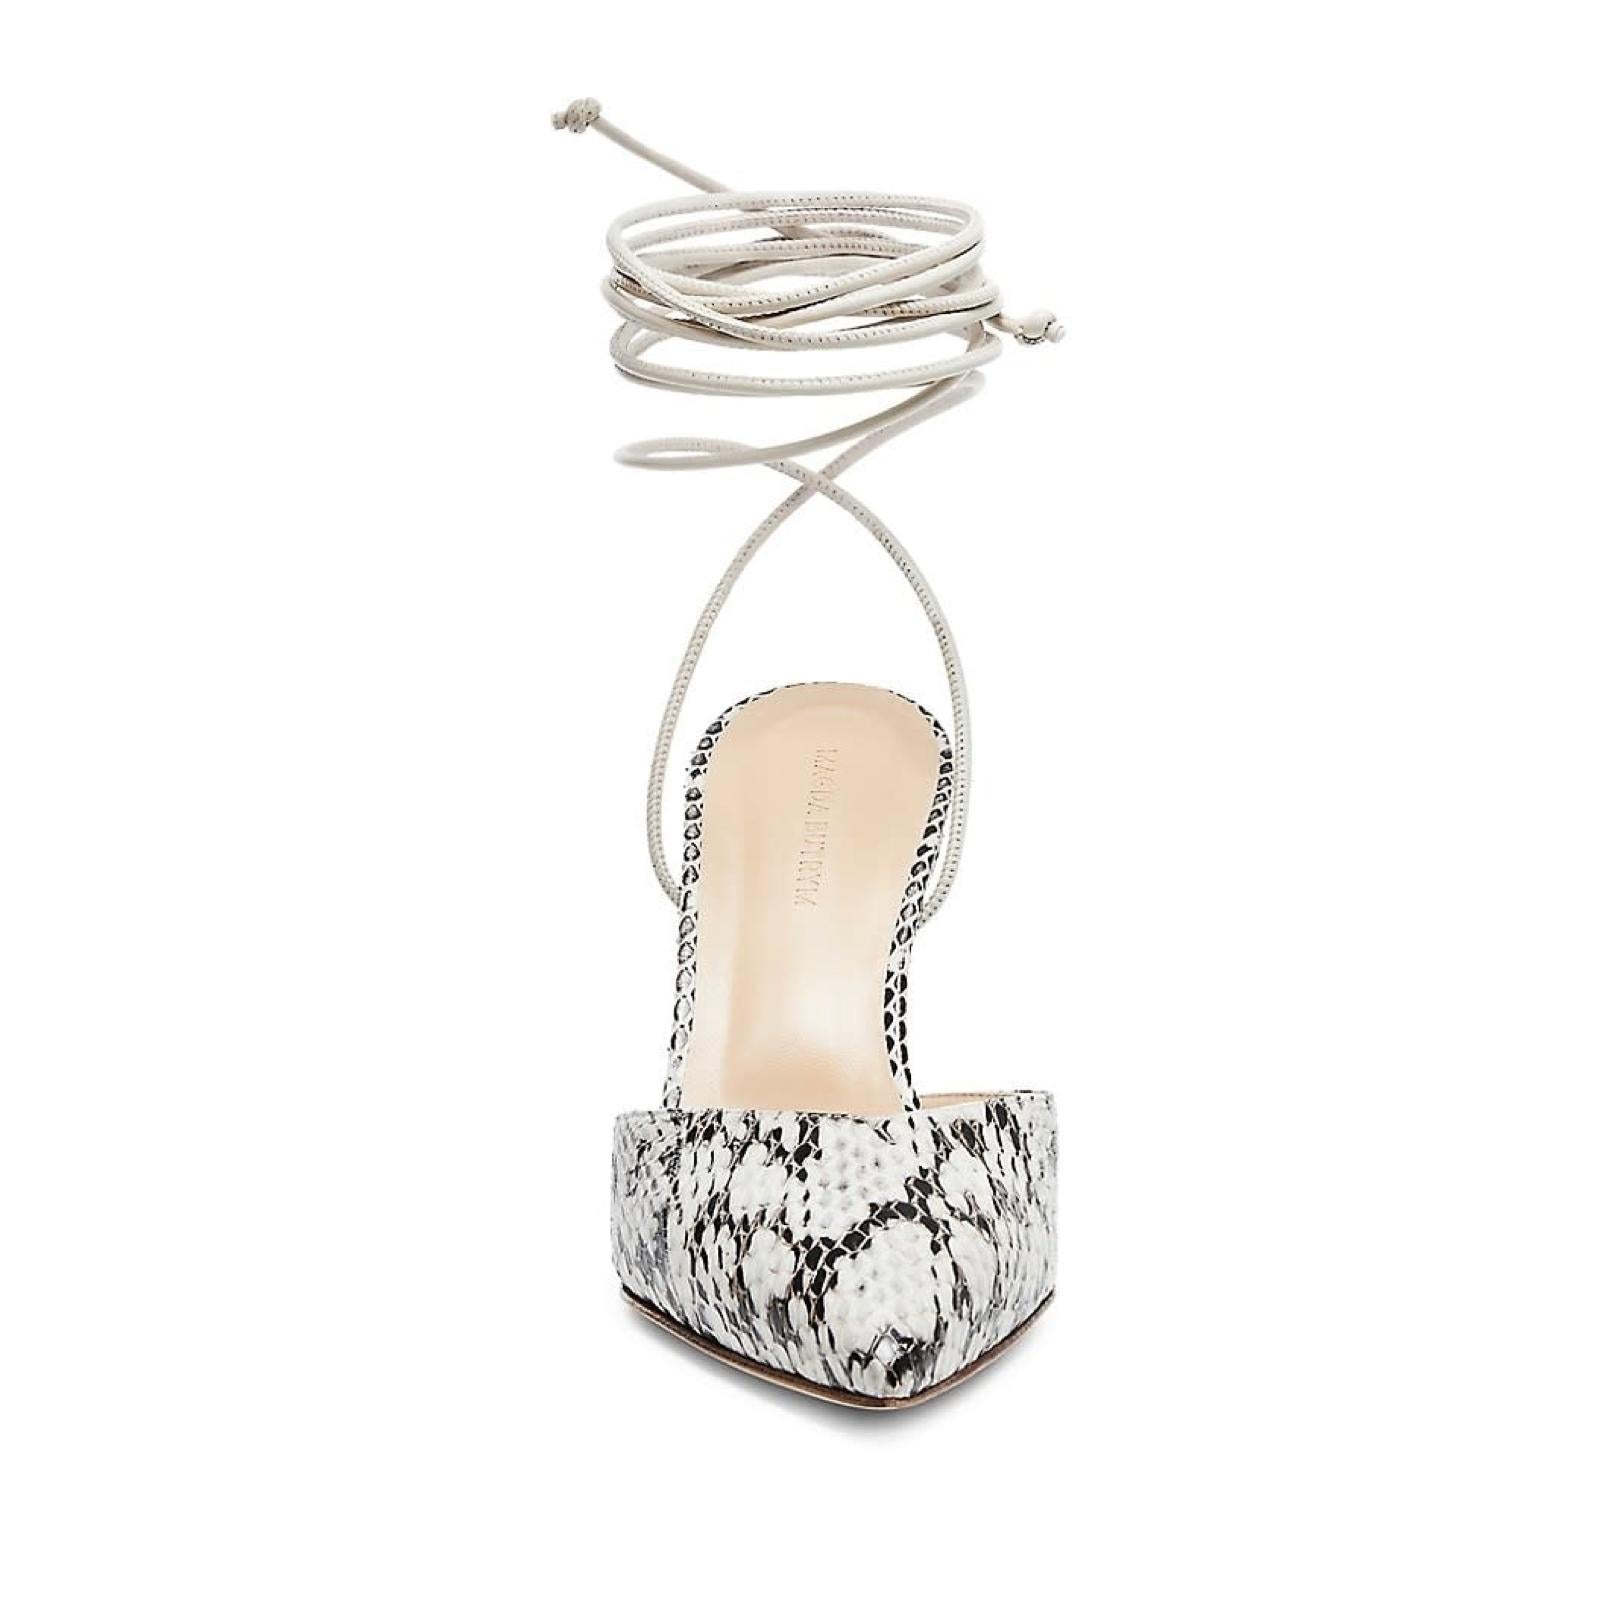 Neat and nice sandals with heels, from Magda Butrym. Pointy toe and a strap to tie around the ankle.

COLOR: Black and white
MATERIAL: Uppers, snake leather. Sole, calf leather.
SIZE: 38 EU / 7 US
HEEL HEIGHT: 100 mm / 4”
CONDITION: New.
COMES WITH: